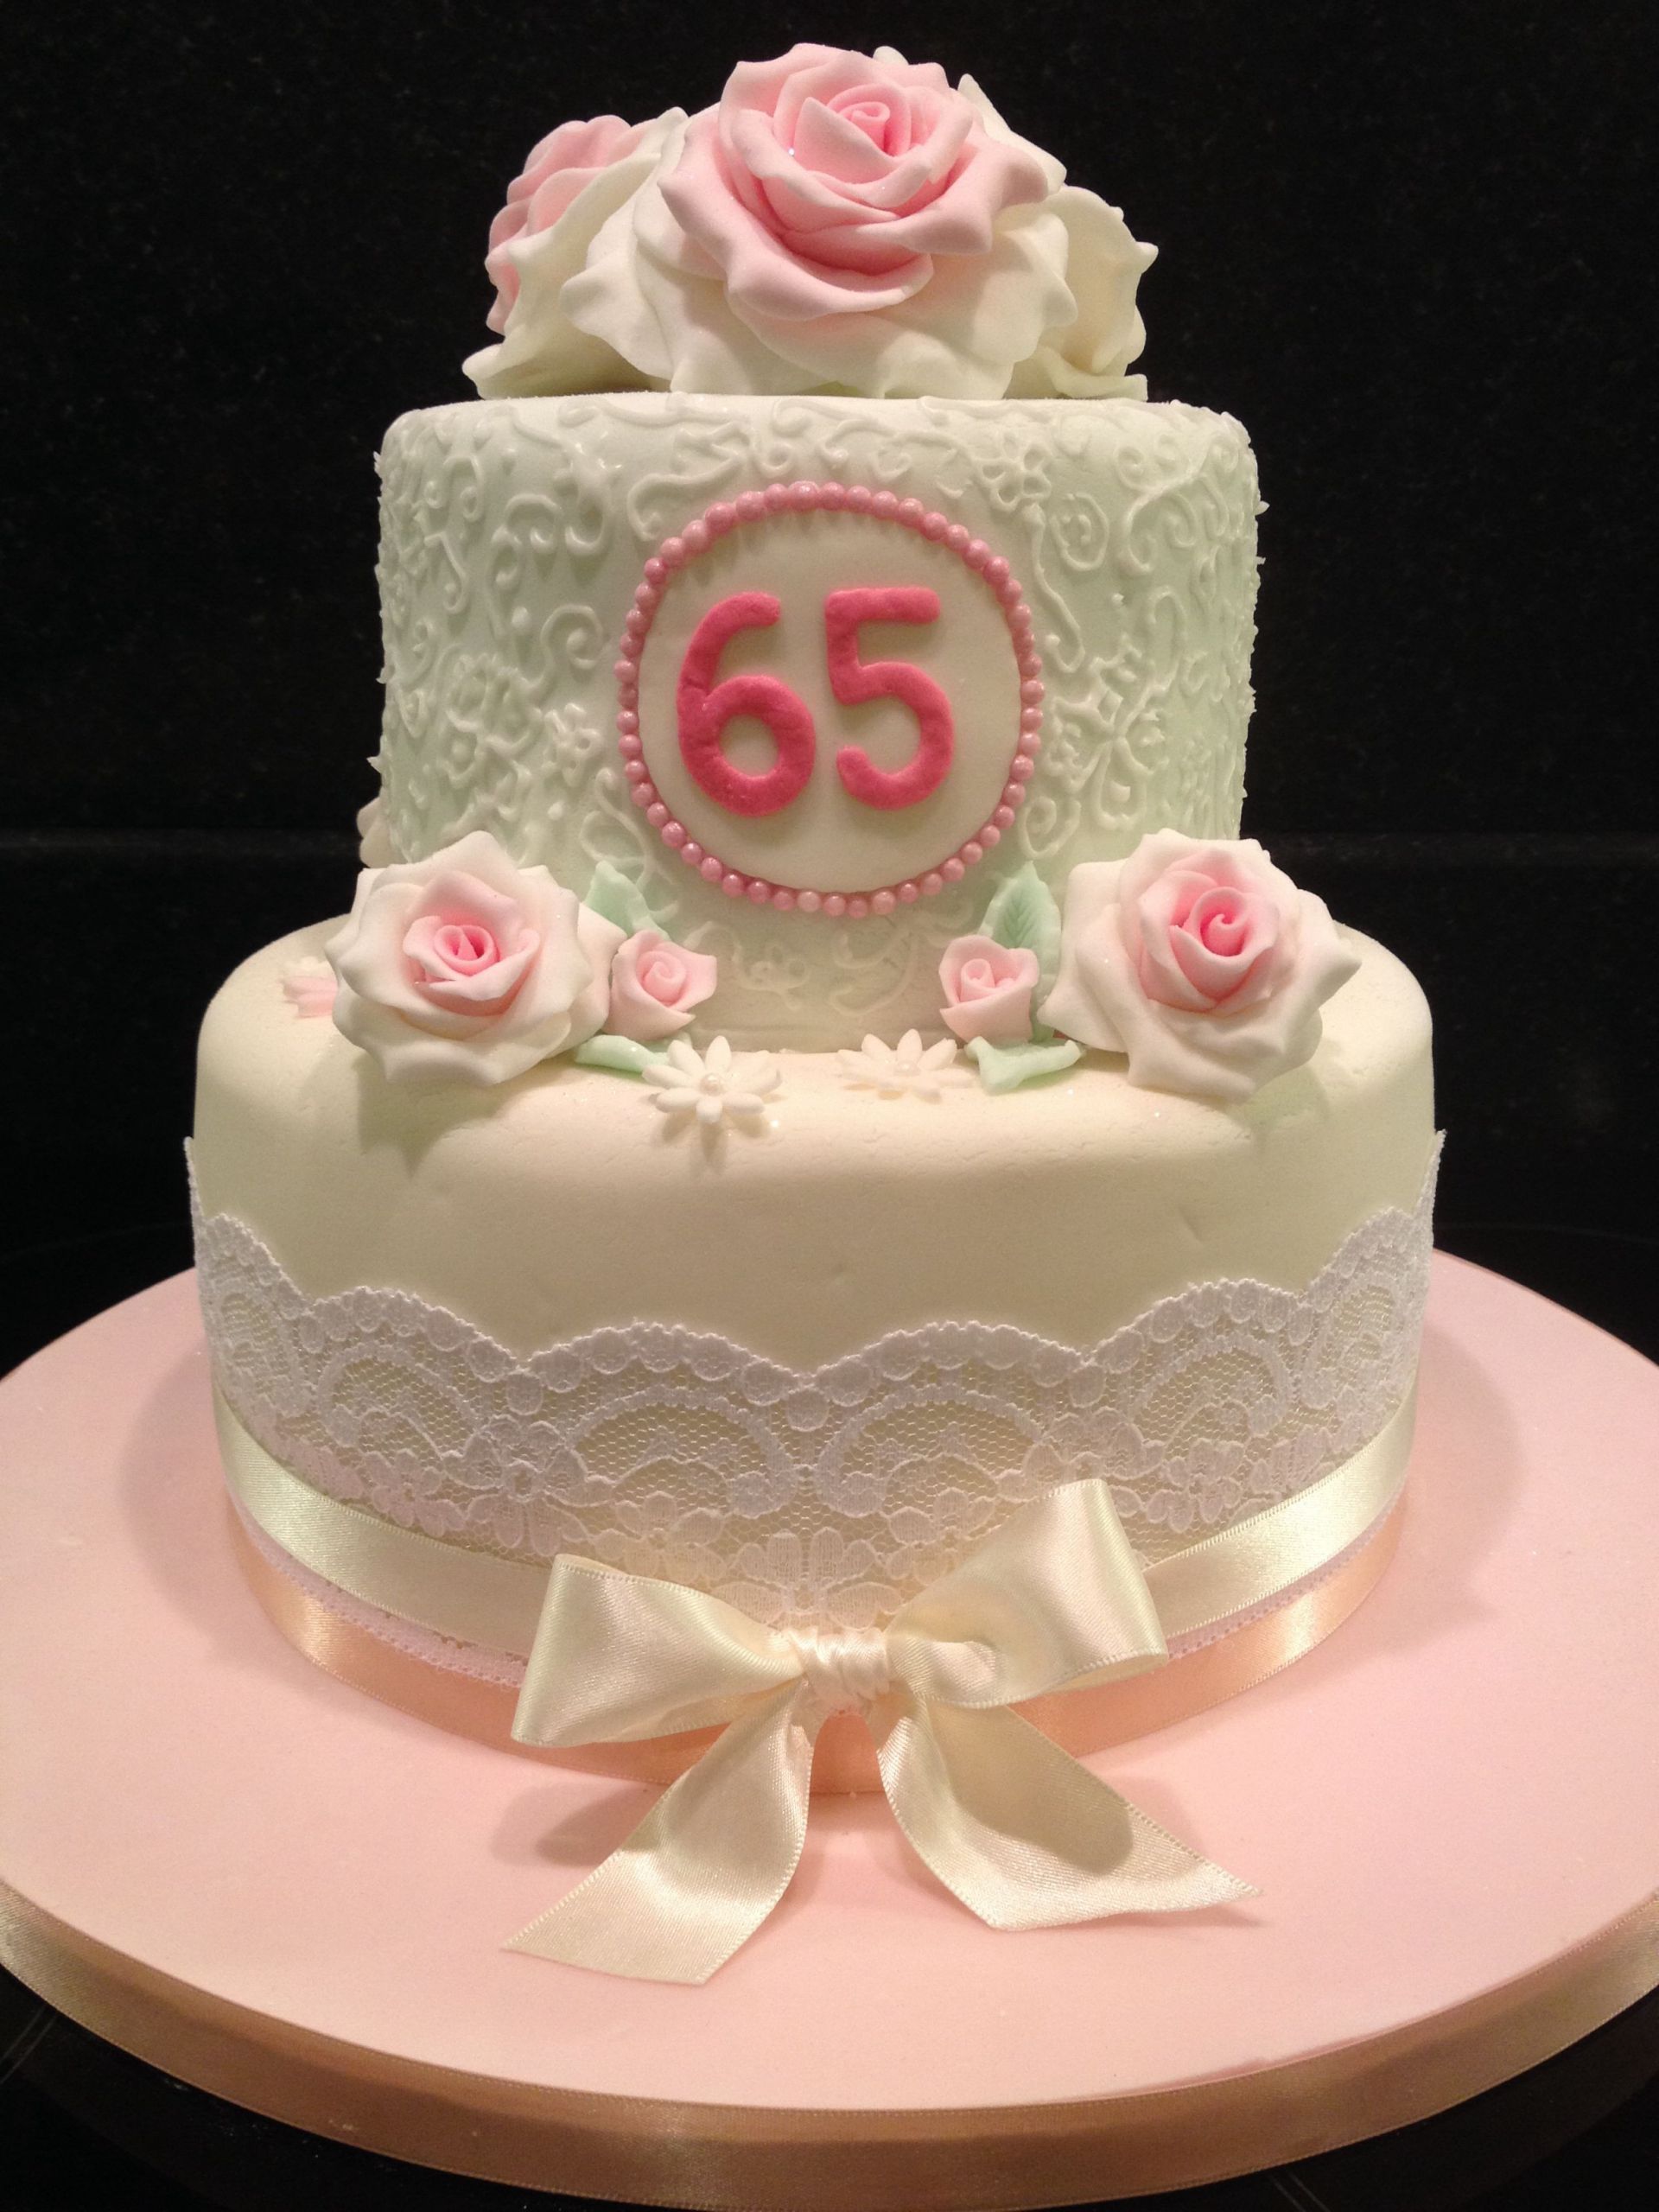 65Th Birthday Gift Ideas For Mom
 20 Ideas for 65th Birthday Gift Ideas for Mom Best Gift